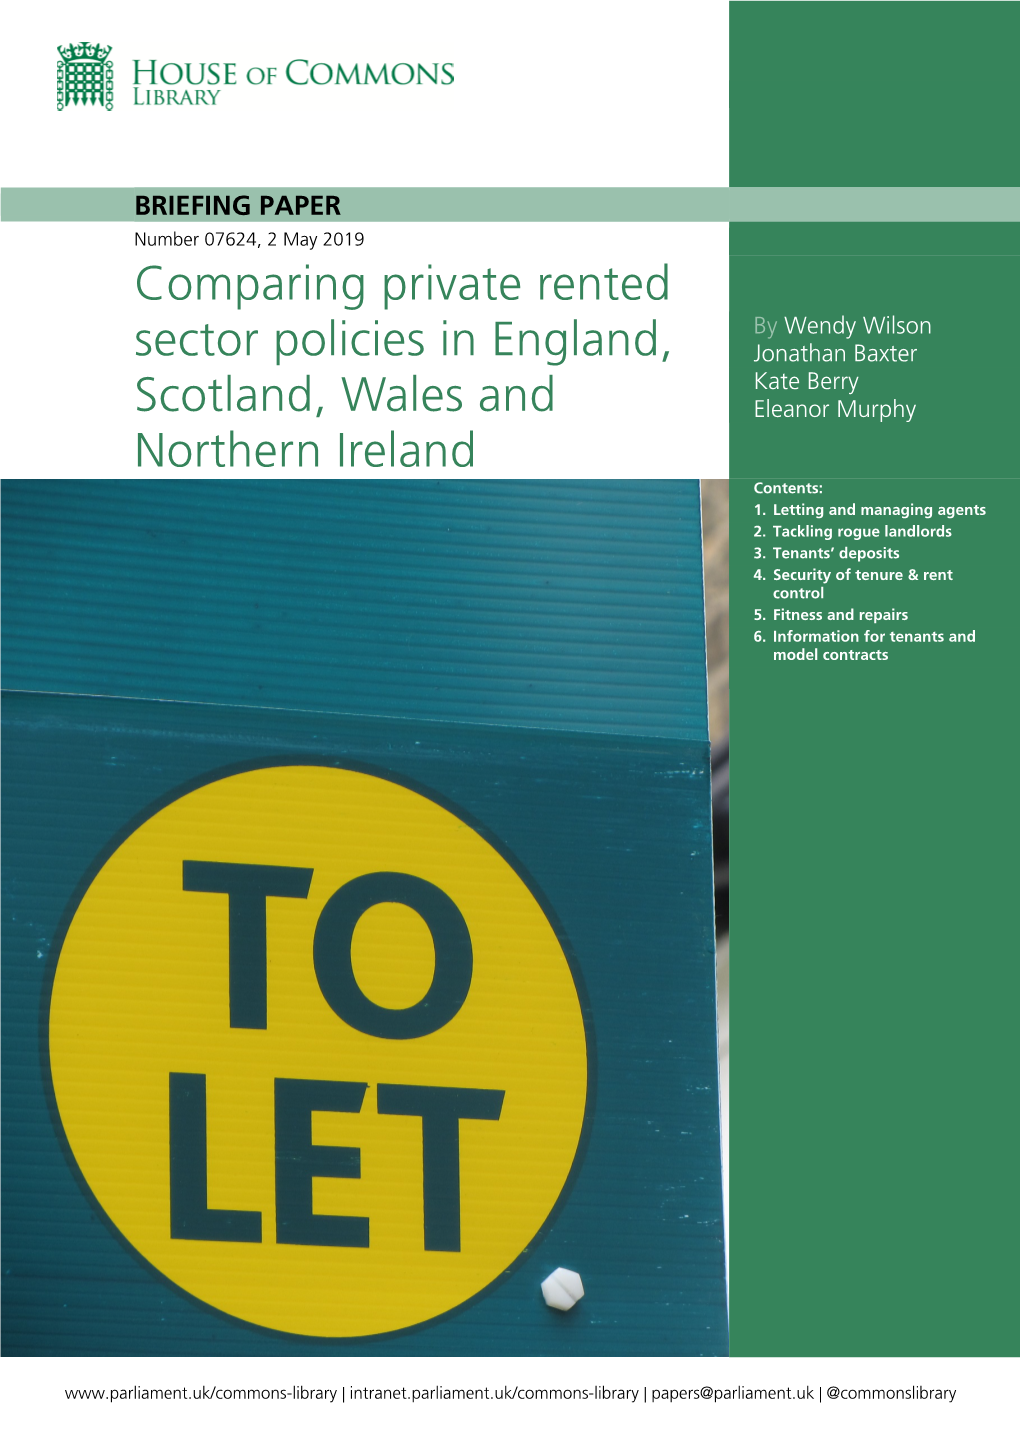 Comparing Private Rented Sector Policies in England, Scotland, Wales and Northern Ireland